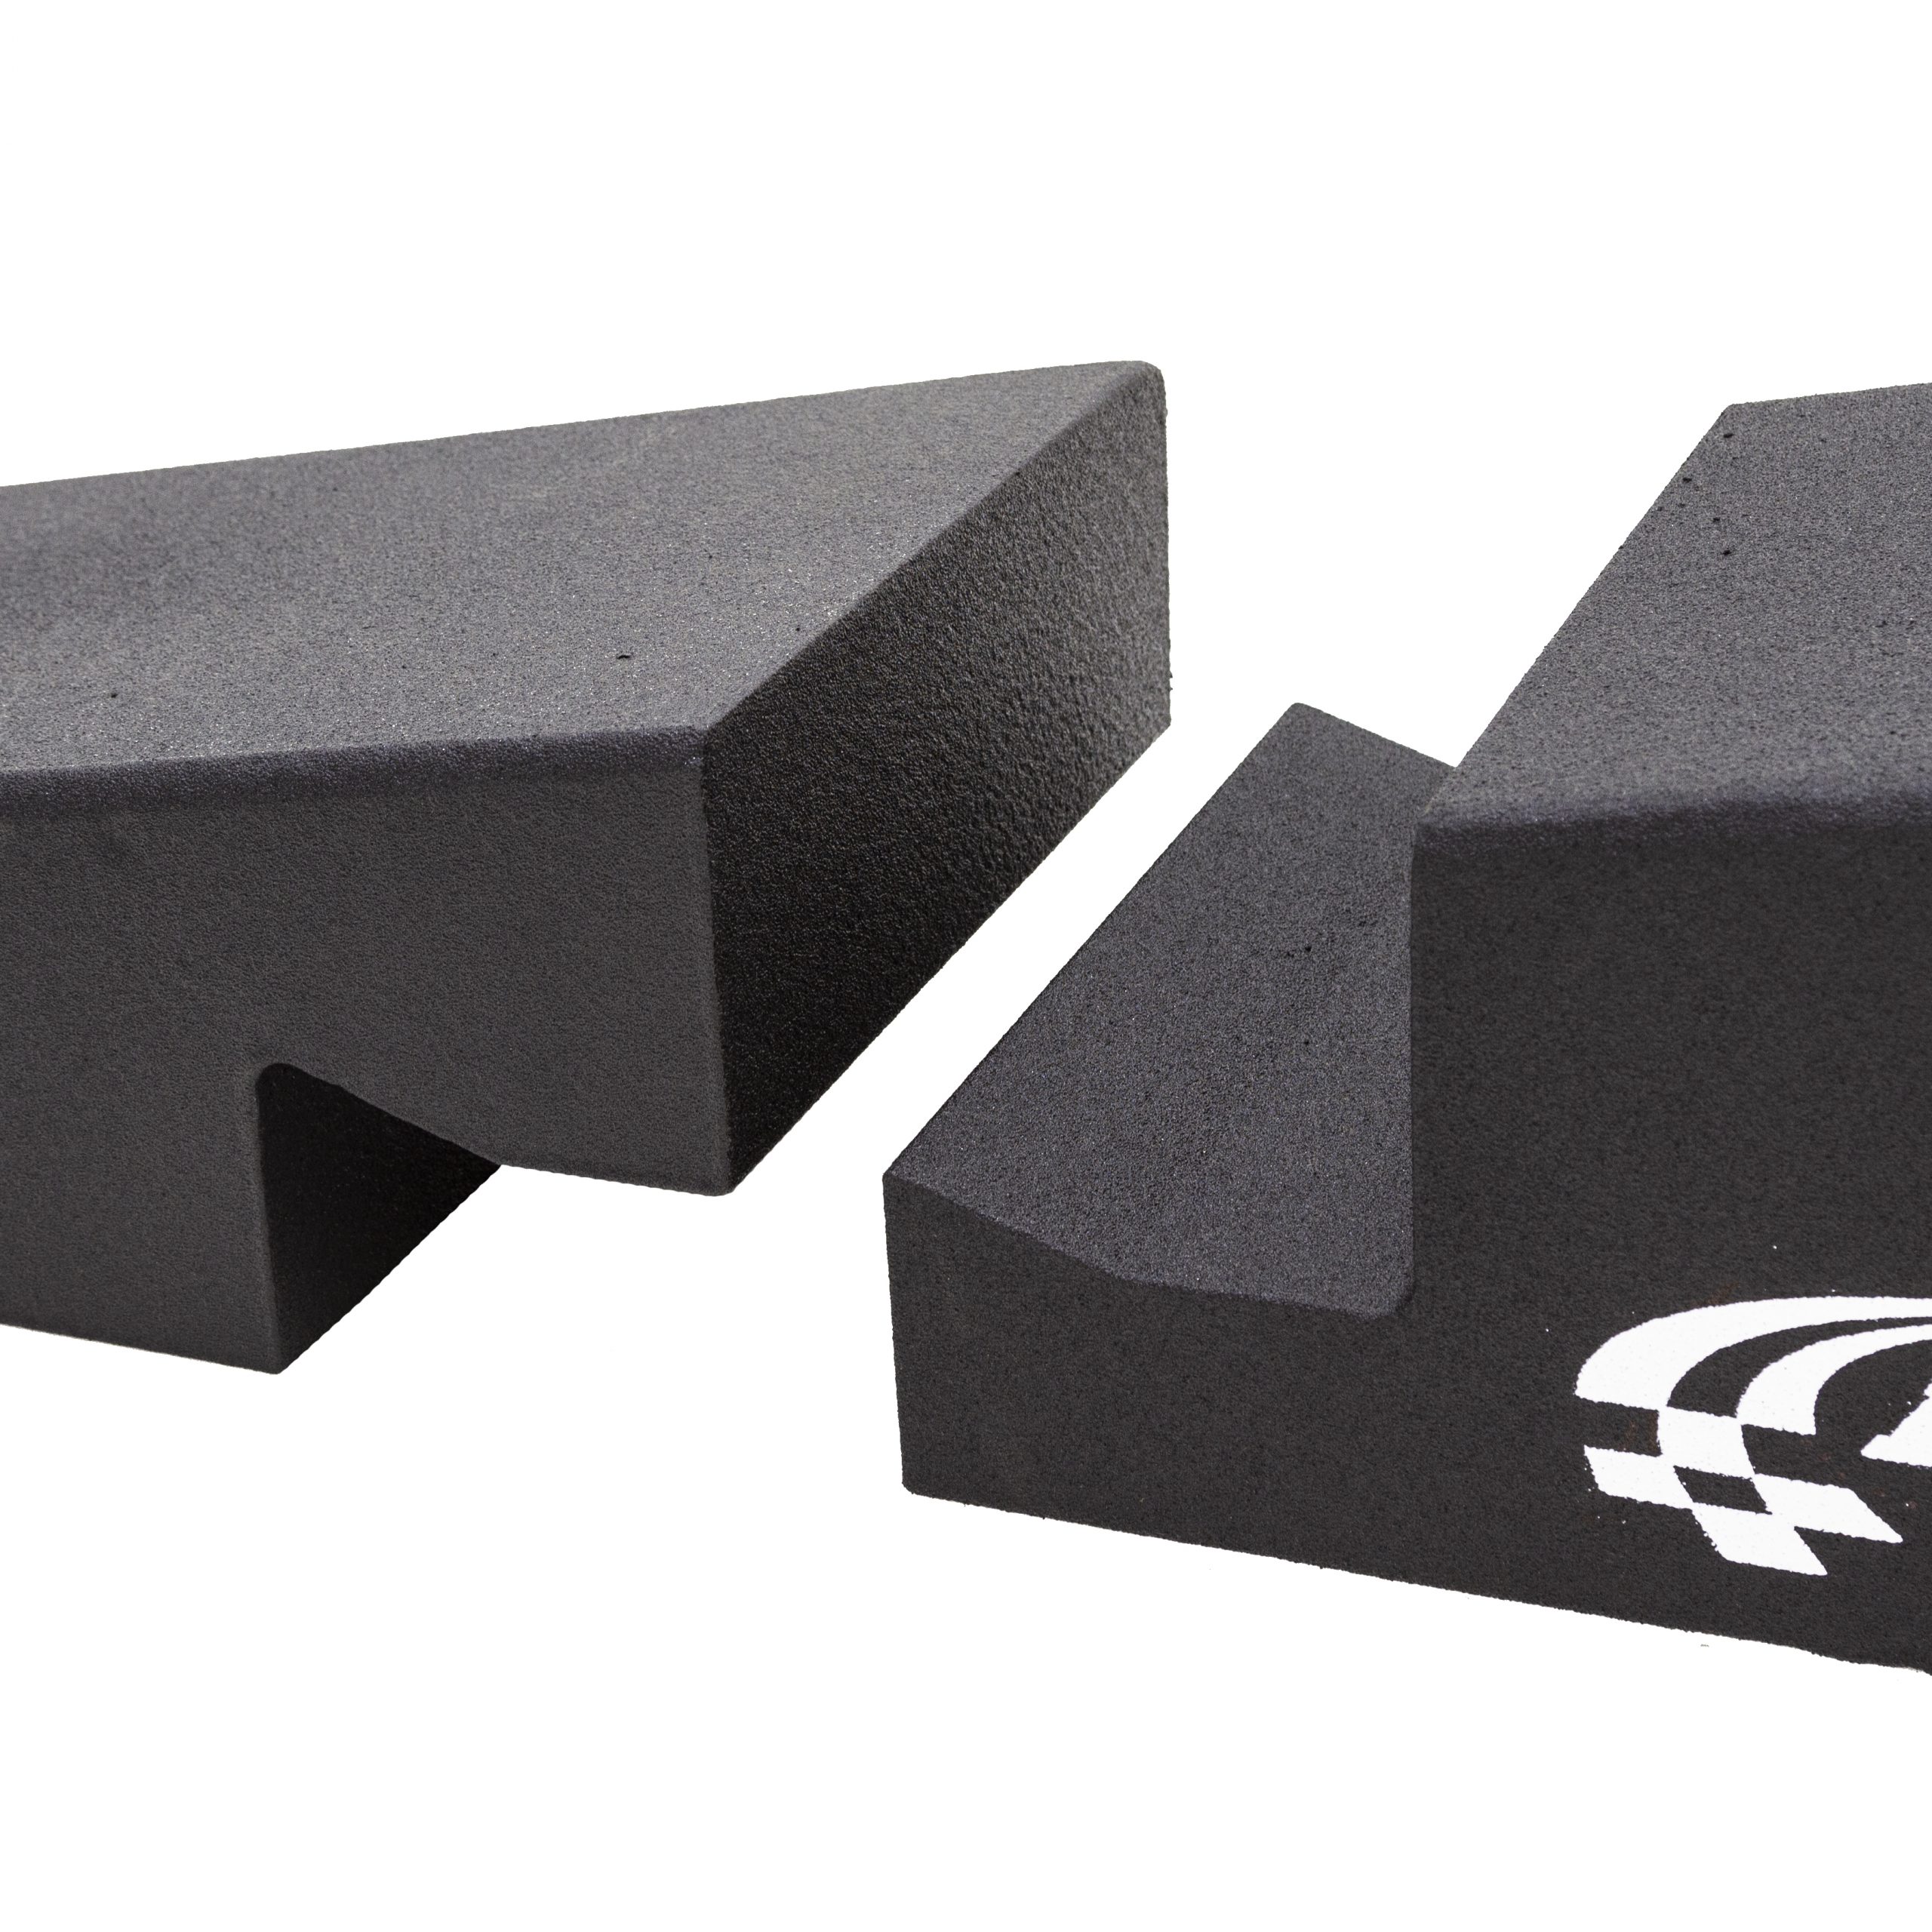 Renewed Race Ramps RR-EX-14 Extenders for 67 L XT Race Ramps Pack of 2 